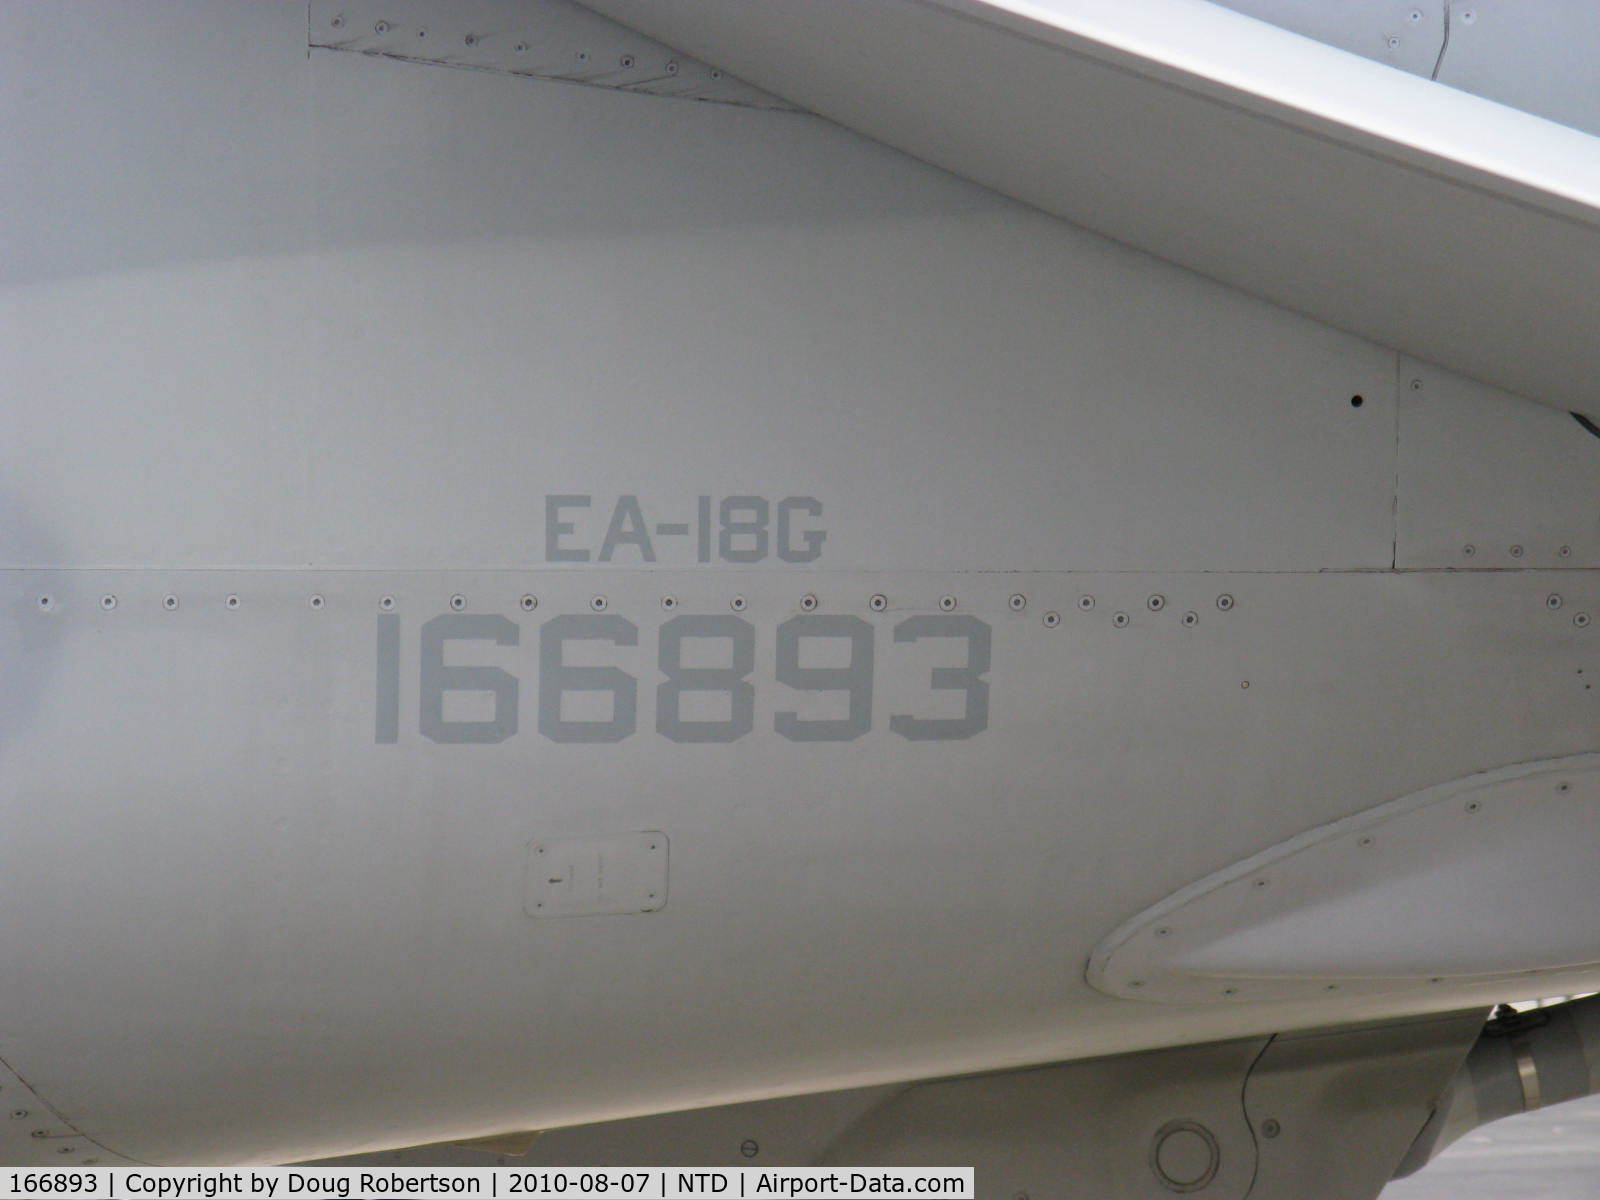 166893, Boeing EA-18G Growler C/N G-5, Boeing EA-18G GROWLER Electronic Countermeasures aircraft of NTD's VX-30 VIKINGS to replace Grumman EA-6B PROWLER. Will provide close-in support and jamming. Low viz camo BuNo.